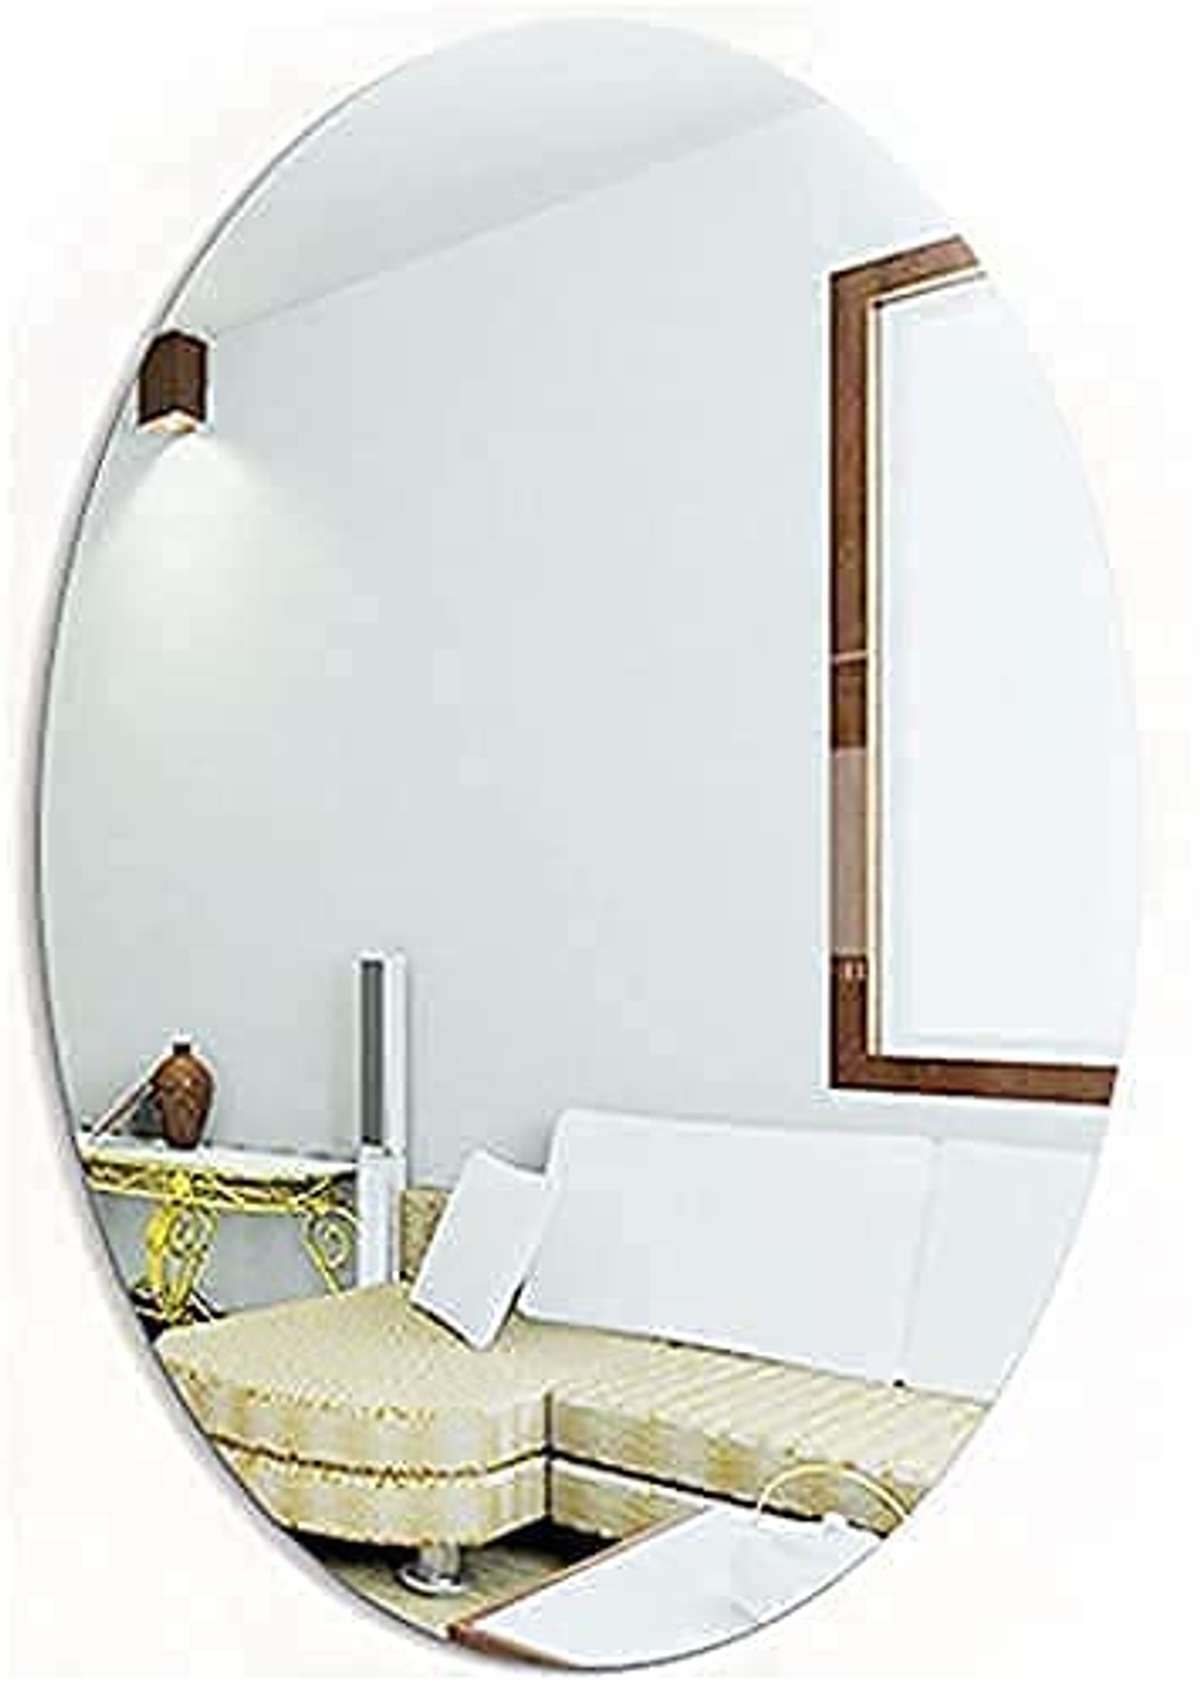 IGNITO oval shape adhesive mirror sticker for wall on tiles bathroom  bedroom living room unbreakable plastic